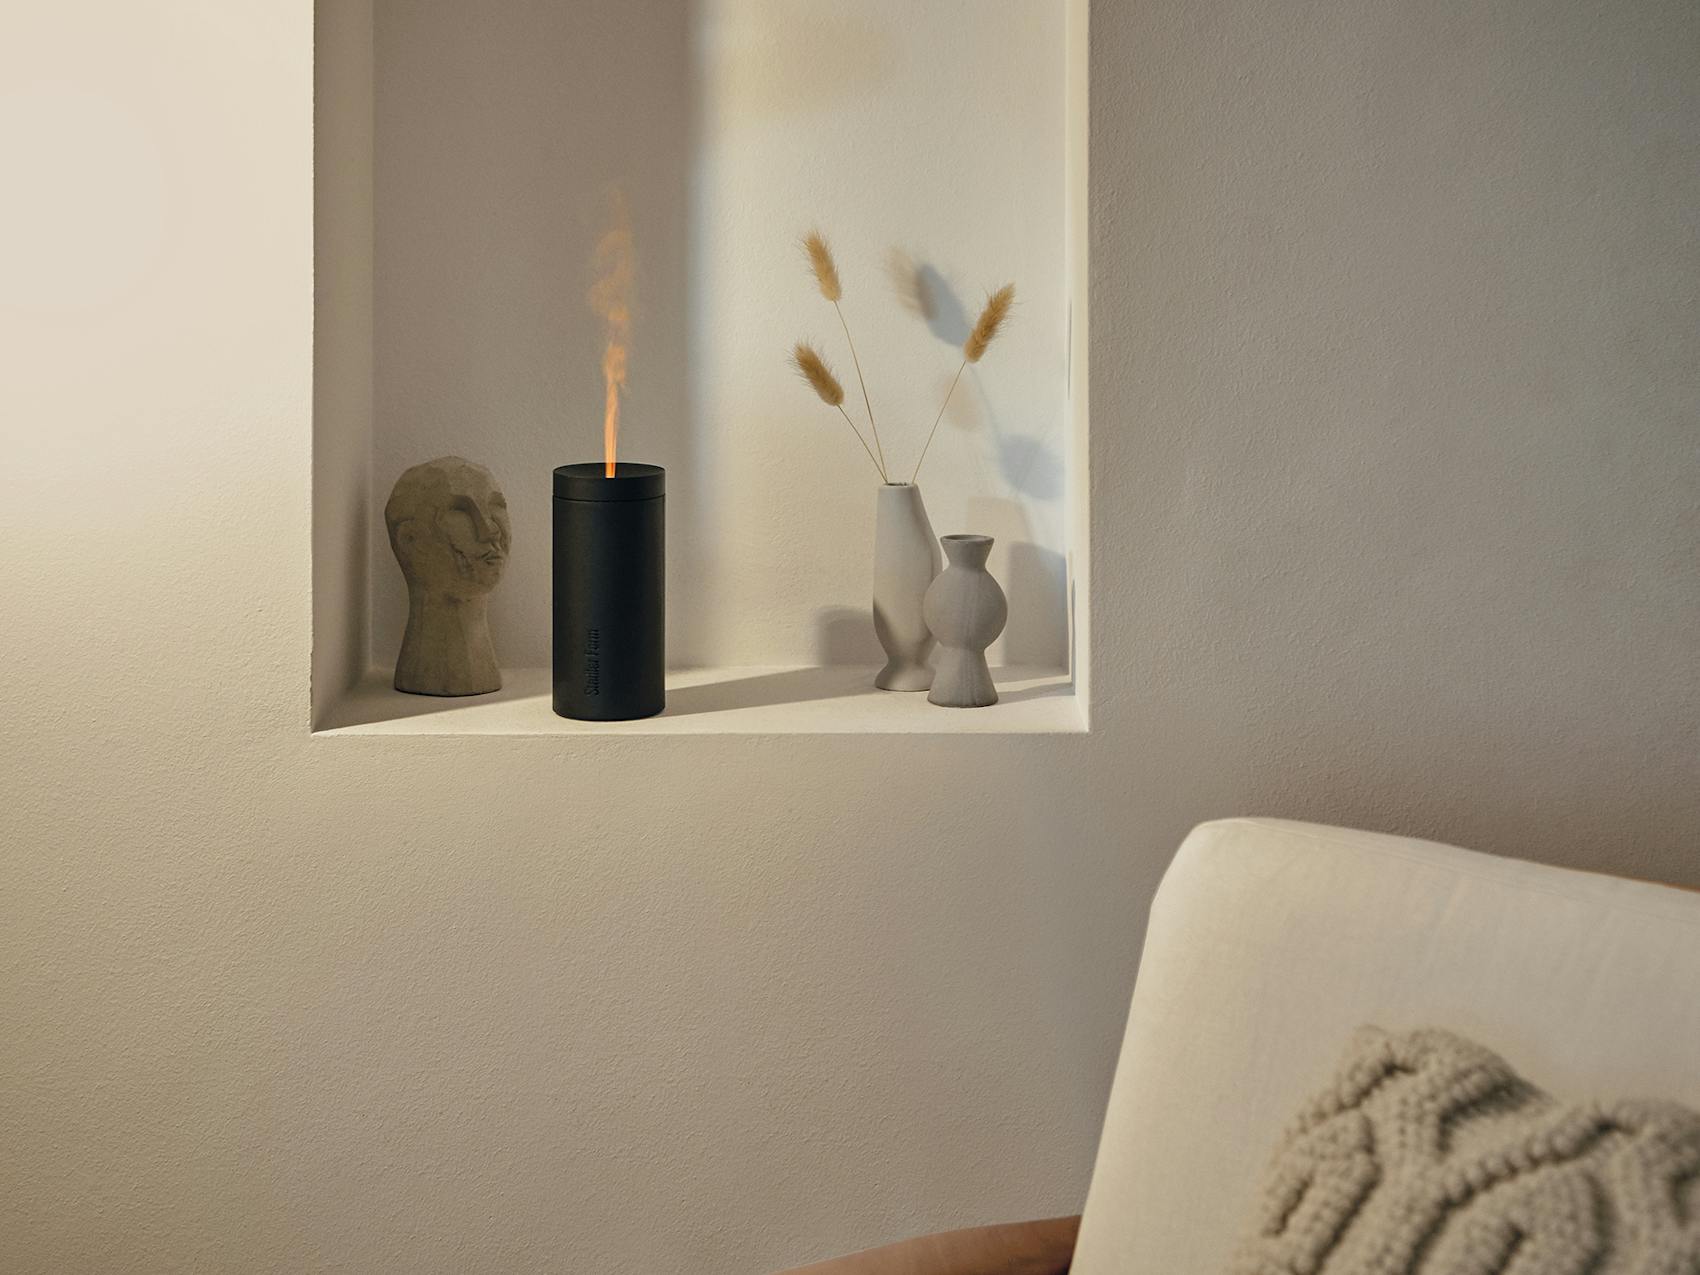 Lucy aroma diffuser by Stadler Form in black as decoration in a living room